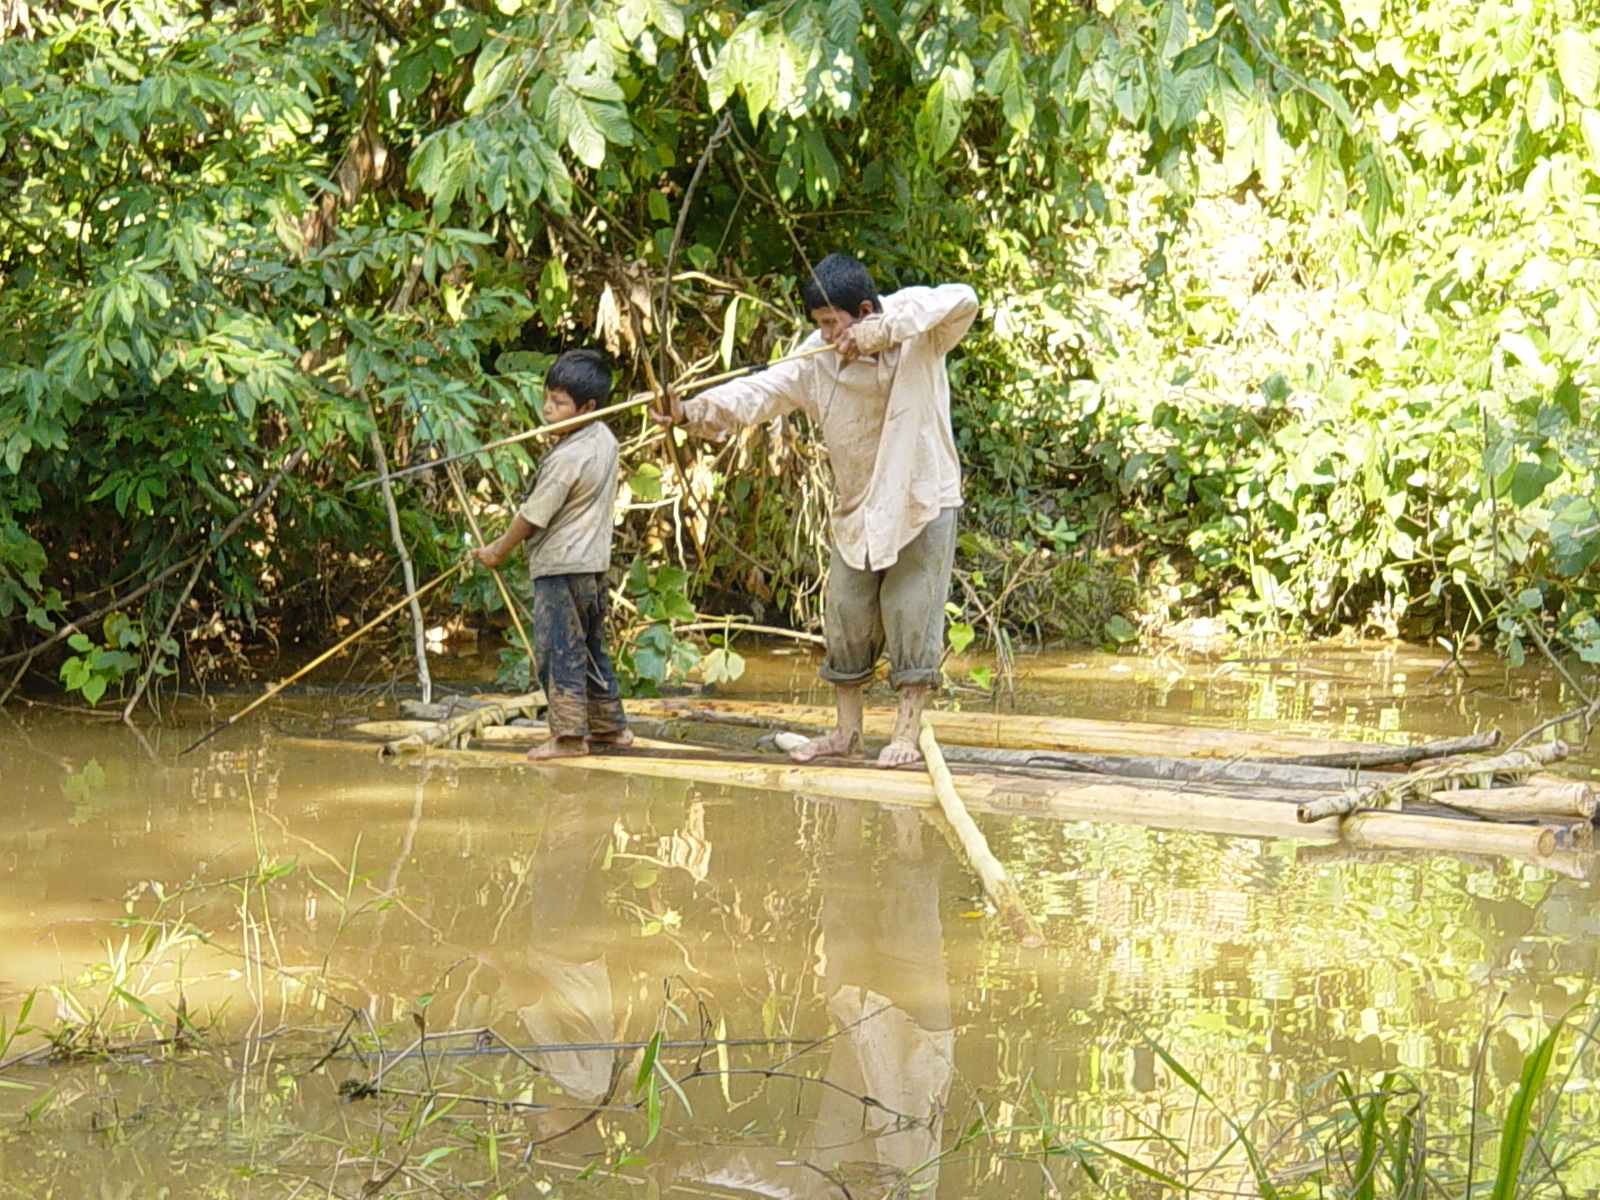 Tsimané fishing with bows and arrows